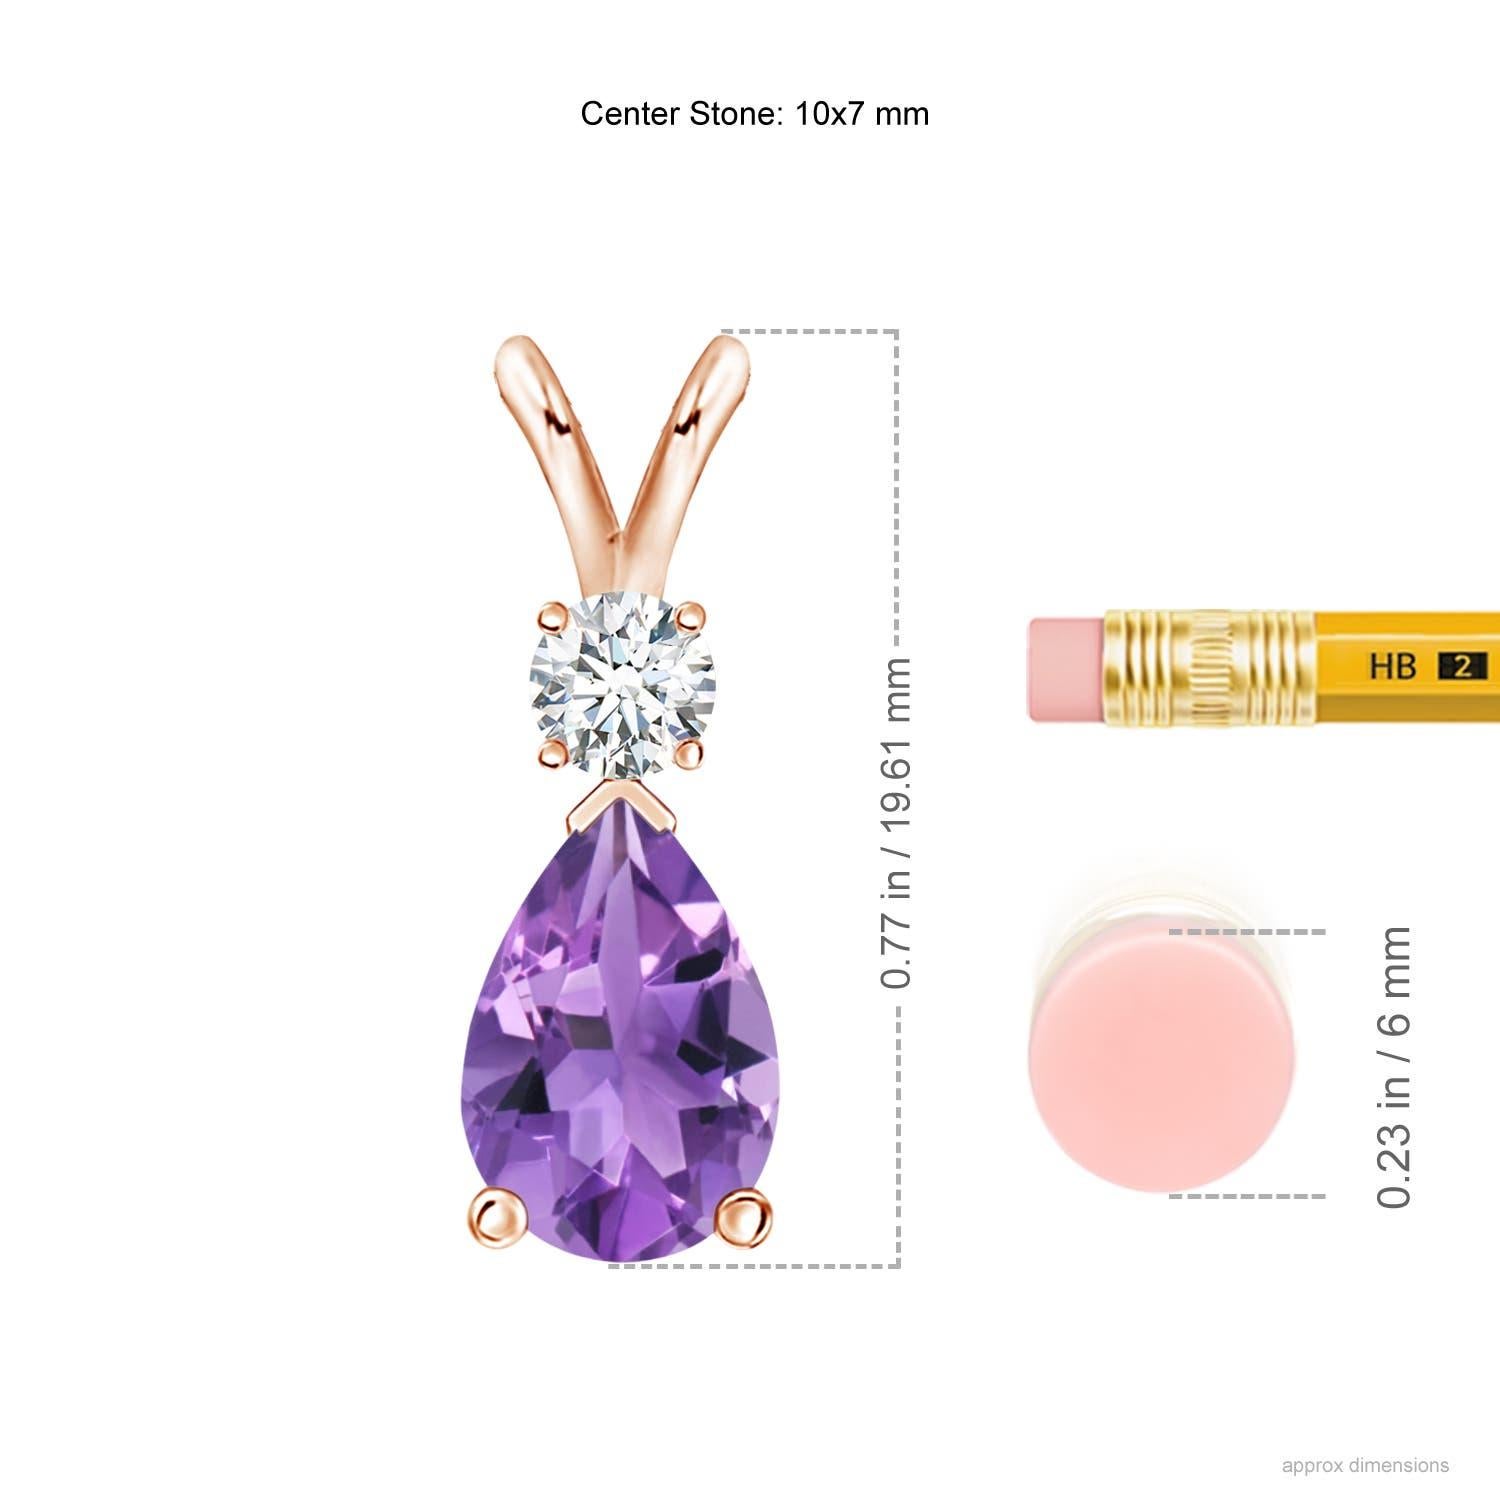 A pear-shaped deep purple amethyst is secured in a prong setting and embellished with a diamond accent on the top. Simple yet stunning, this teardrop amethyst pendant with V bale is sculpted in 14k rose gold.